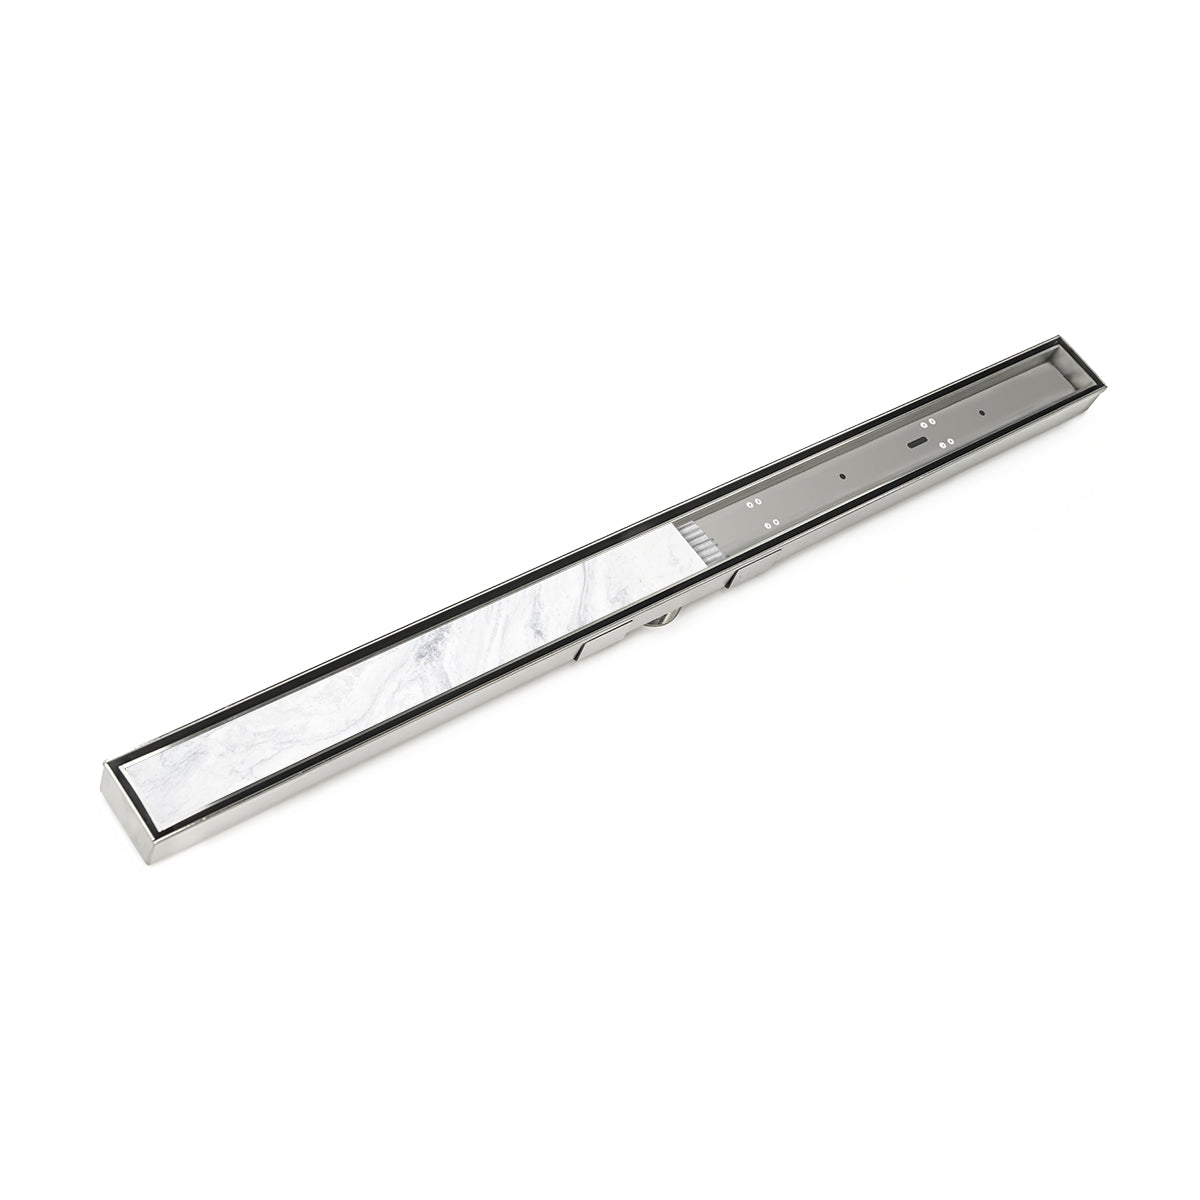 Infinity Drain 96" S-Stainless Steel Series High Flow Site Sizable Linear Drain Kit with Low Profile Tile Insert Frame with Cast Iron Drain Body, 3" No Hub Outlet